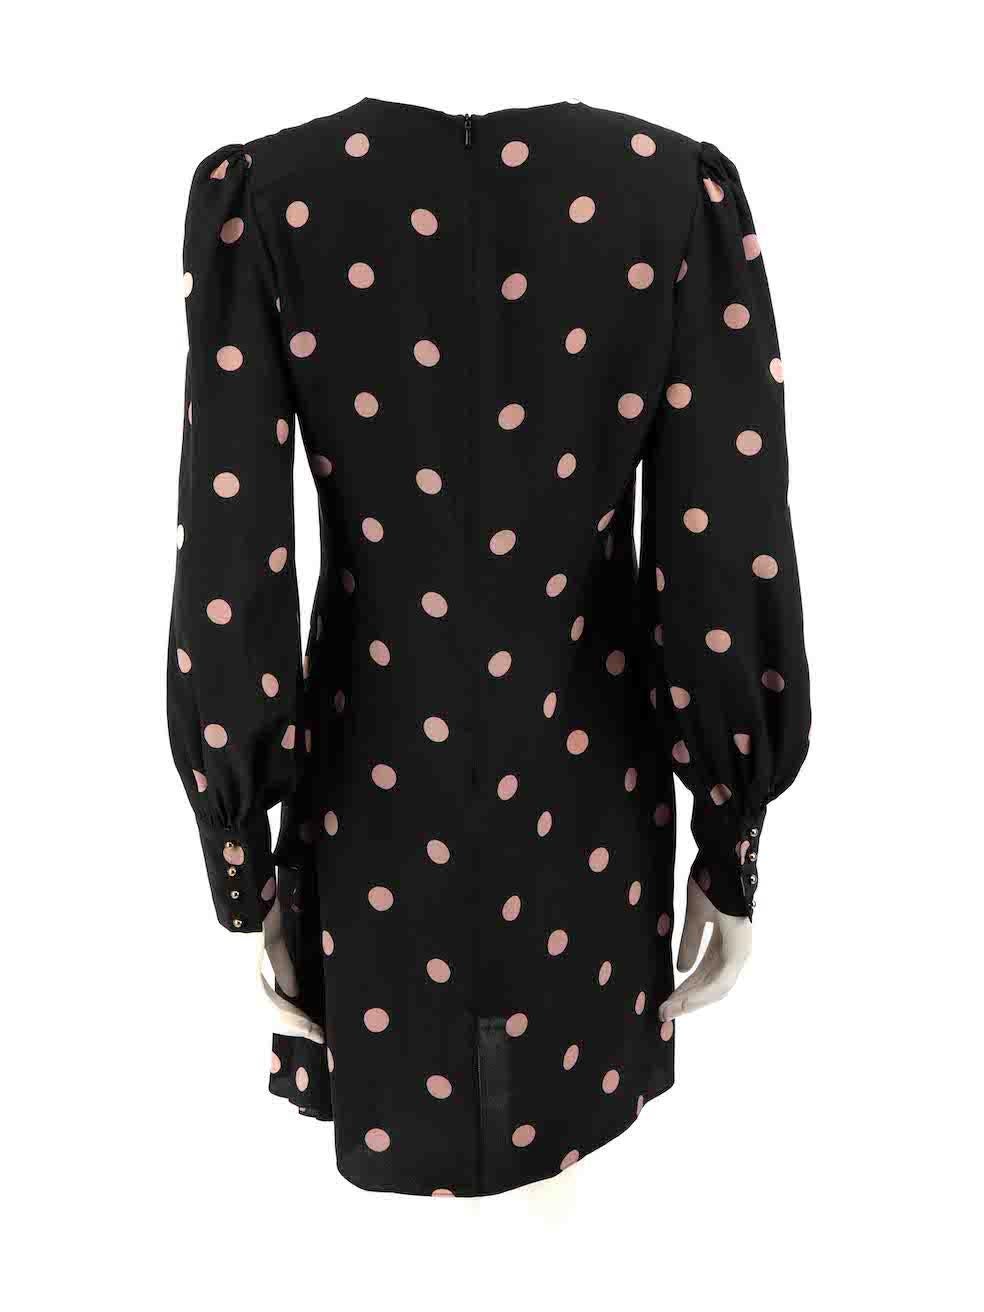 Zimmermann Black Polka Dot Mini Dress Size L In Excellent Condition For Sale In London, GB